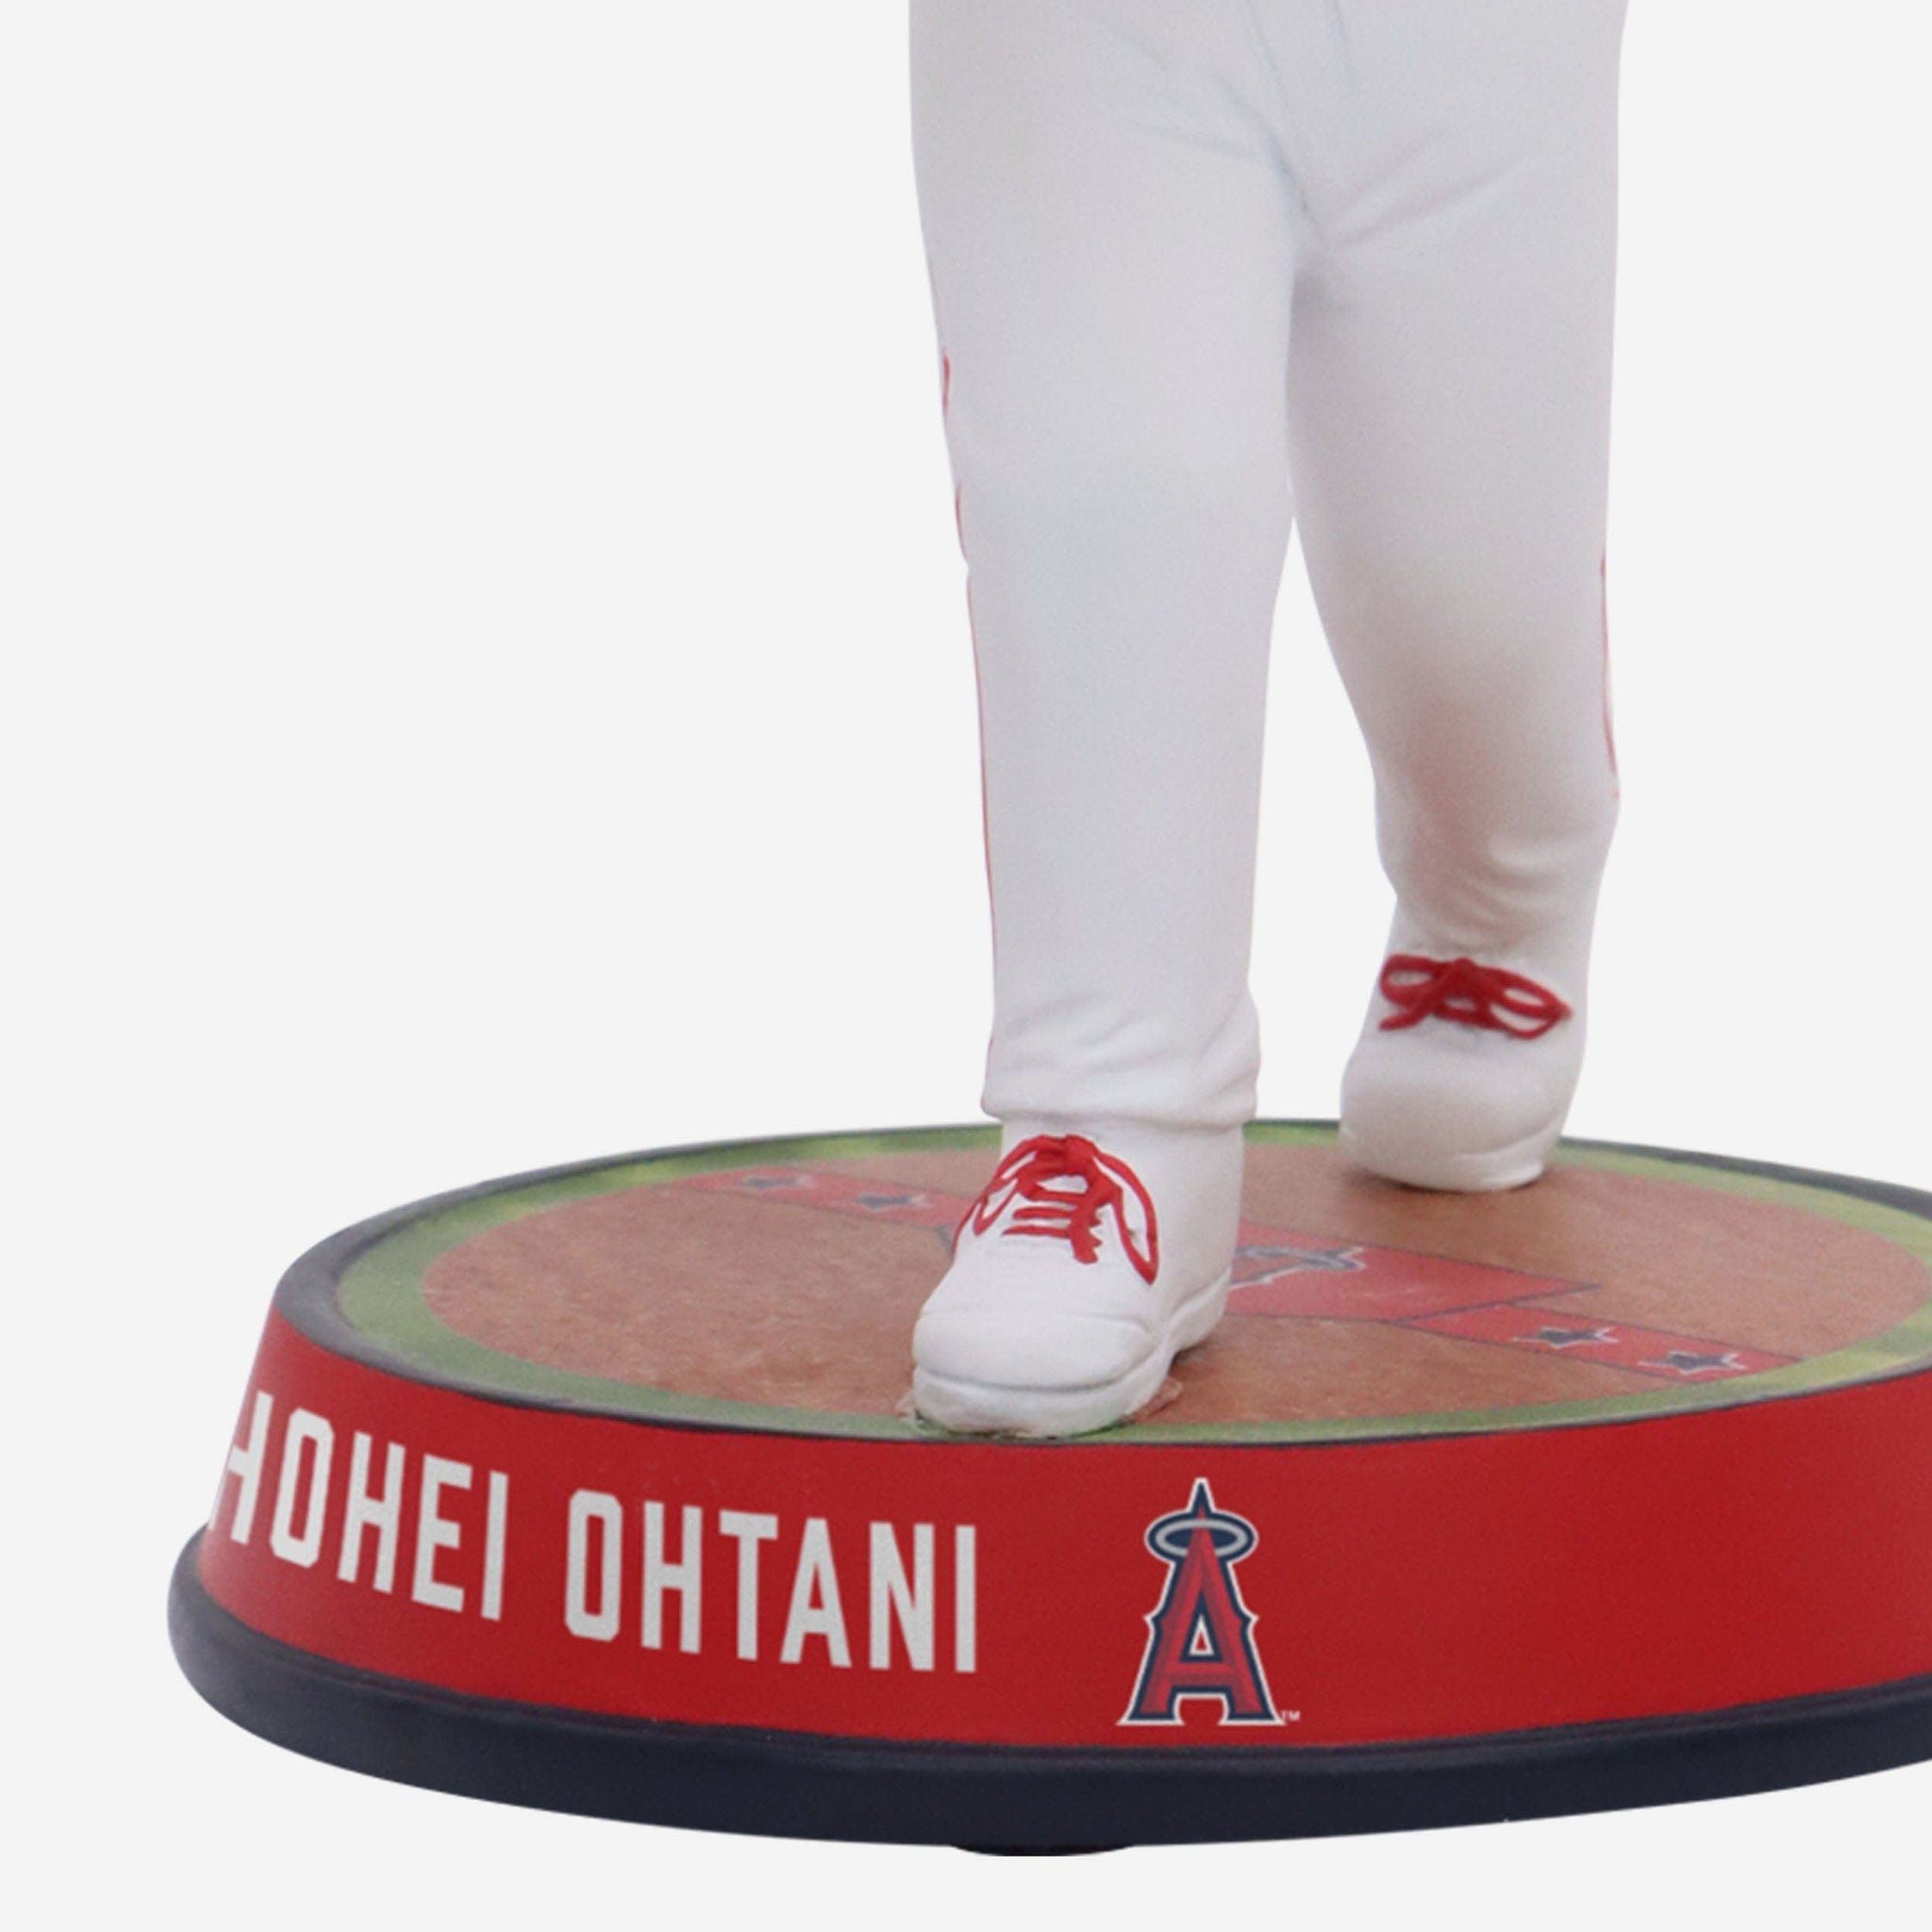 Shohei Ohtani Los Angeles Angels Autographed Funko POP 2-Pack Exclusive  Figurine Set - Limited Edition of